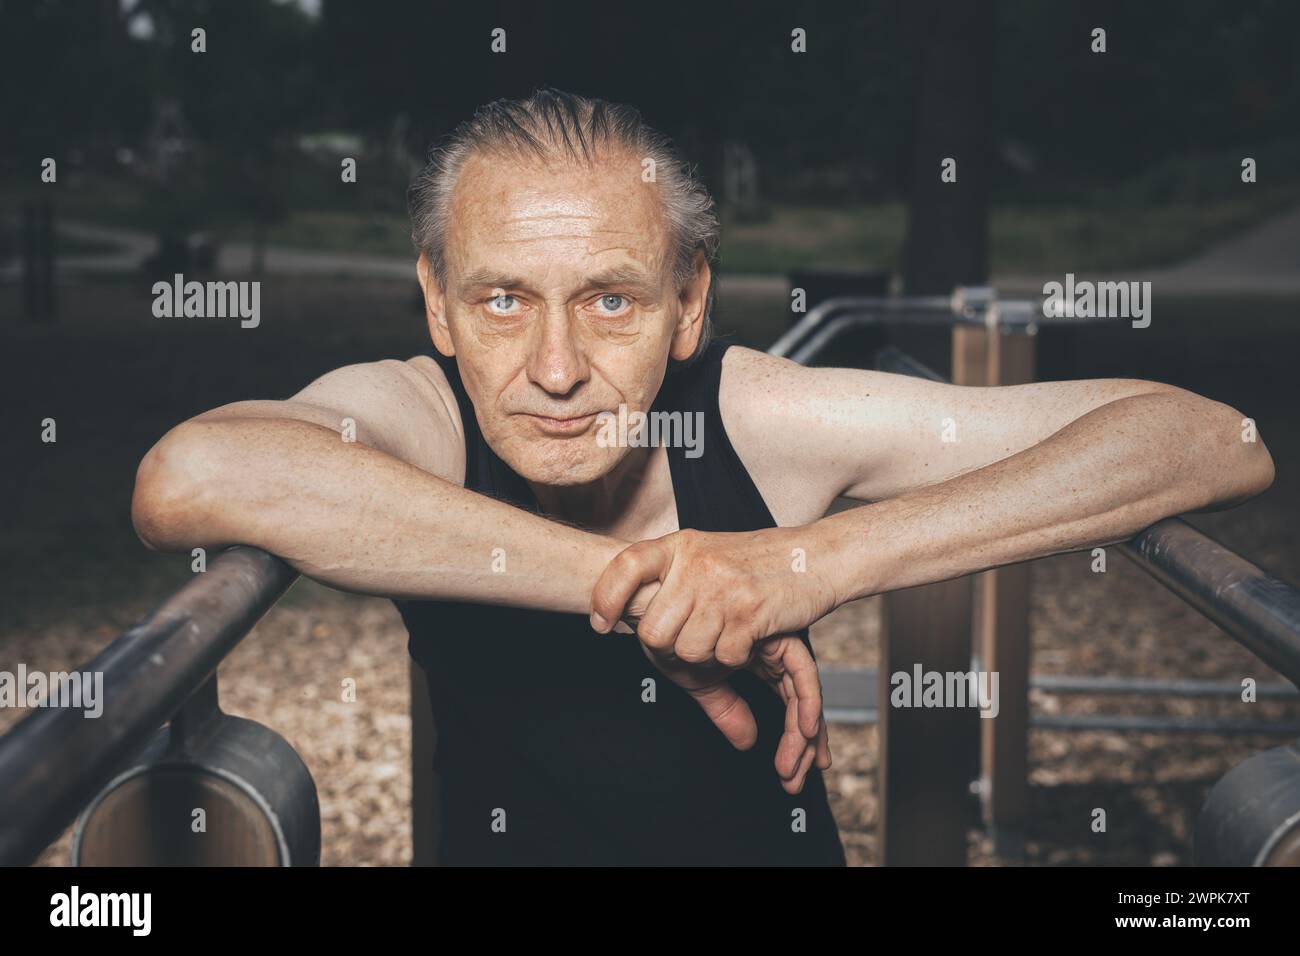 Ugly man of bad condition trying workout in outdoor gym Stock Photo